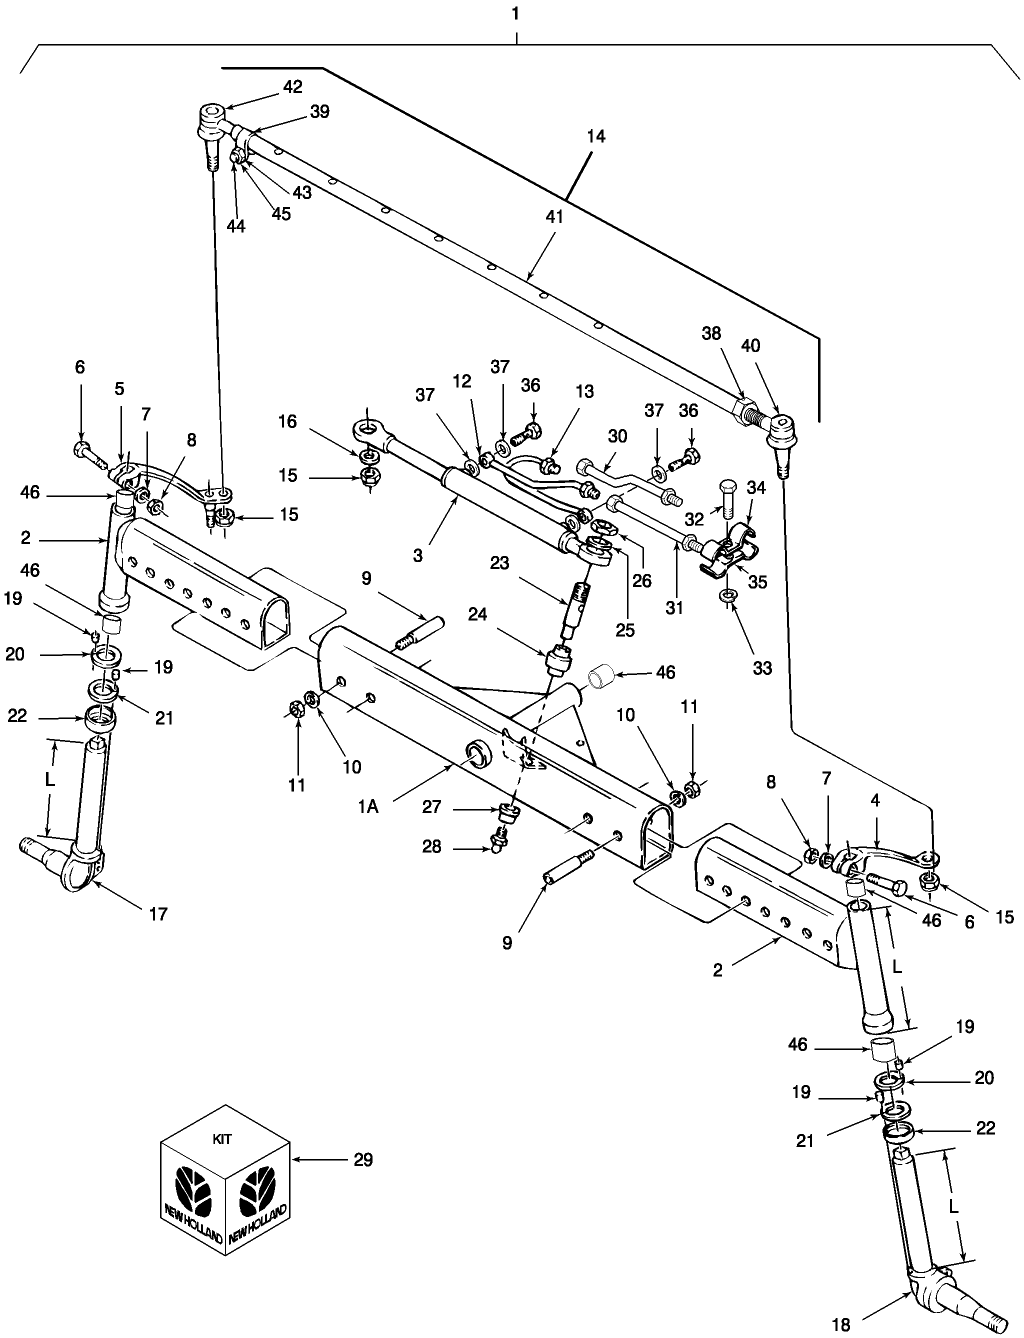 03A05 FRONT AXLE ASSEMBLY (6-94/)